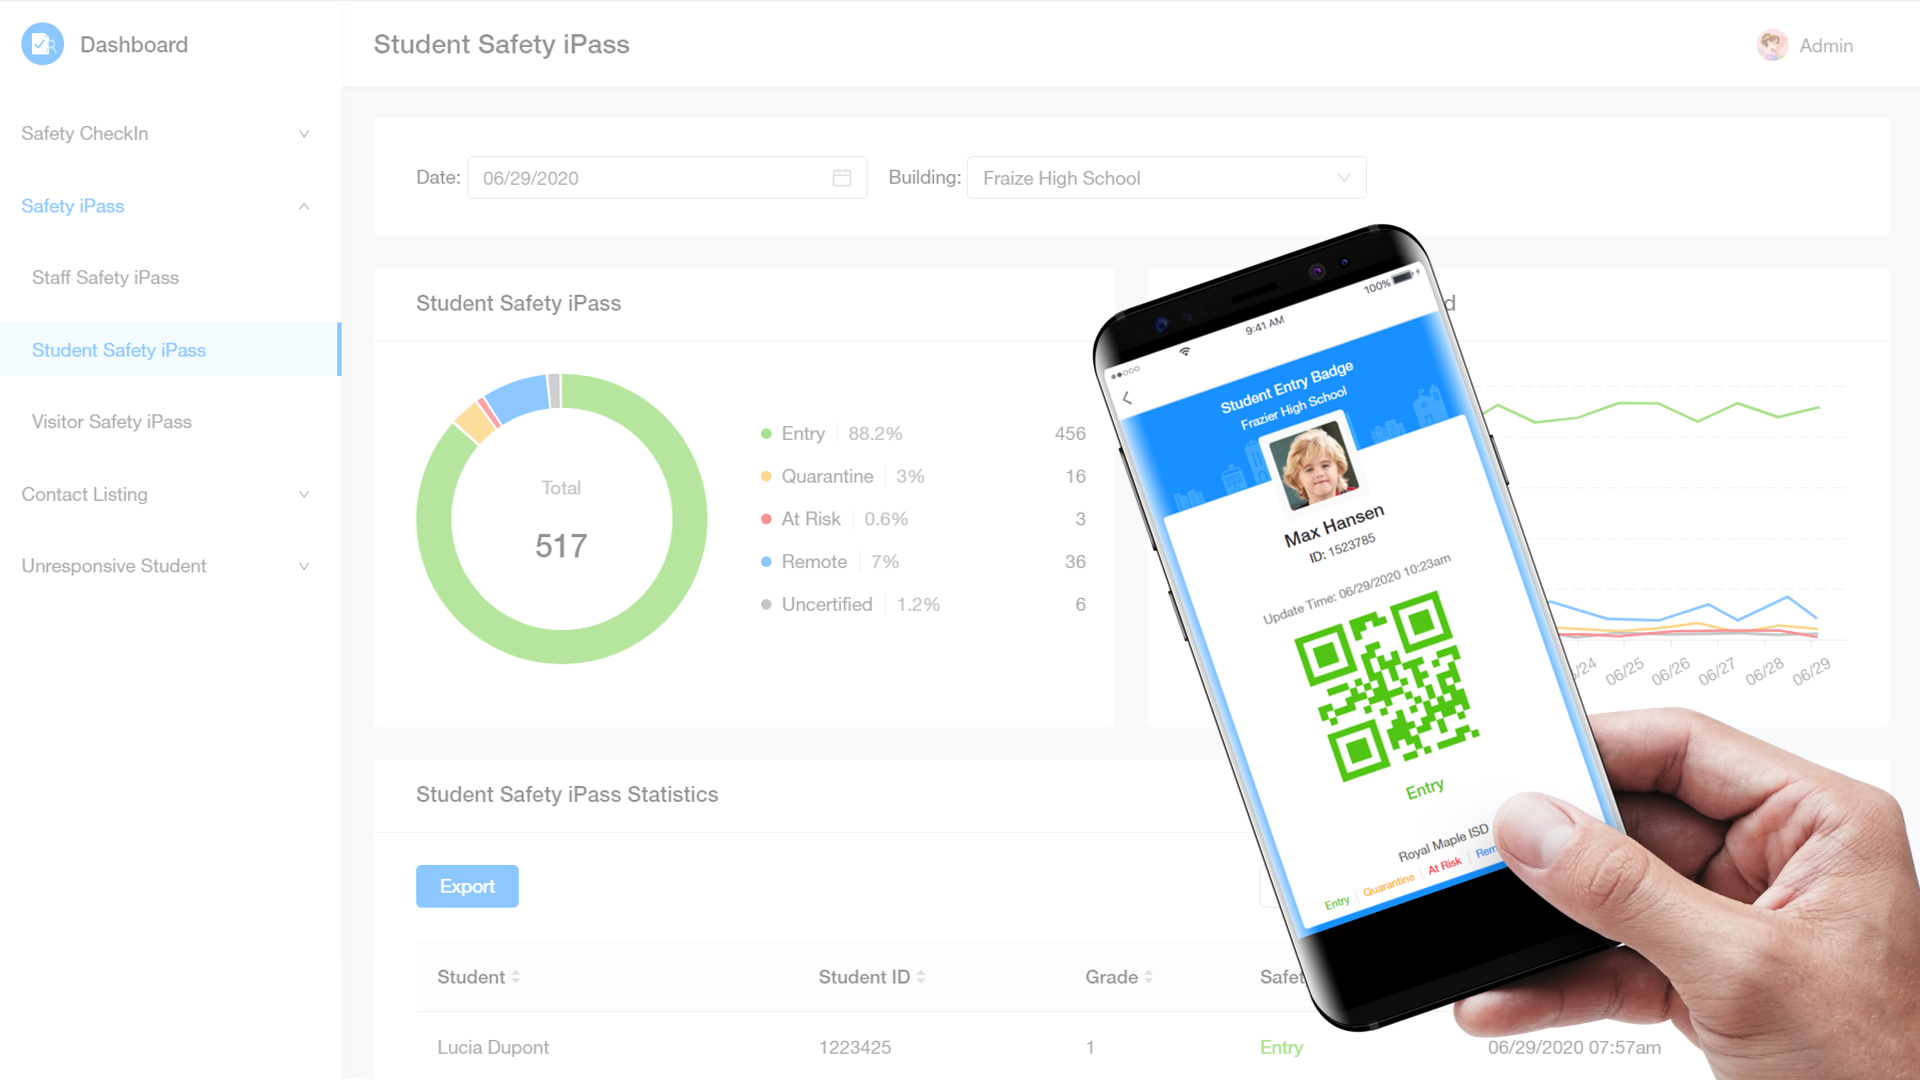 SafetyiPass Image for Landing Page